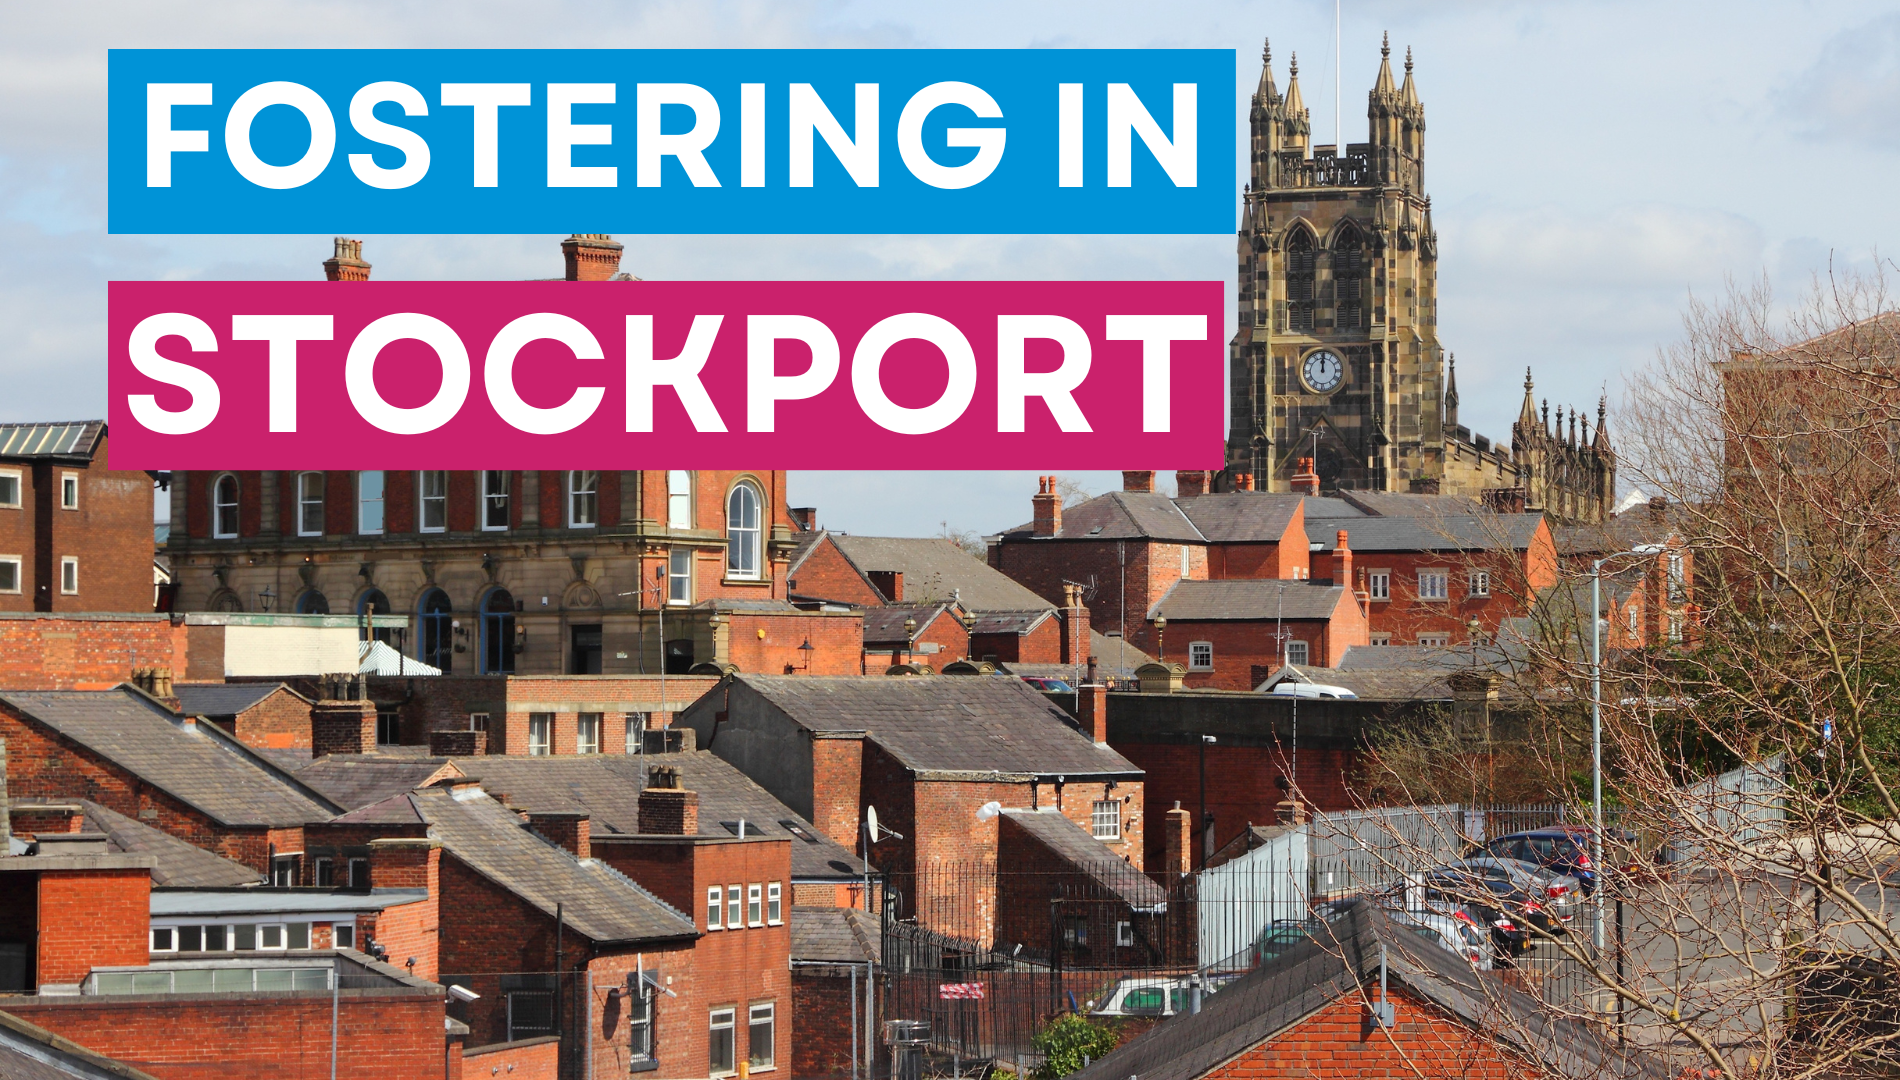 Fostering In Stockport written across a picture of the Stockport skyline